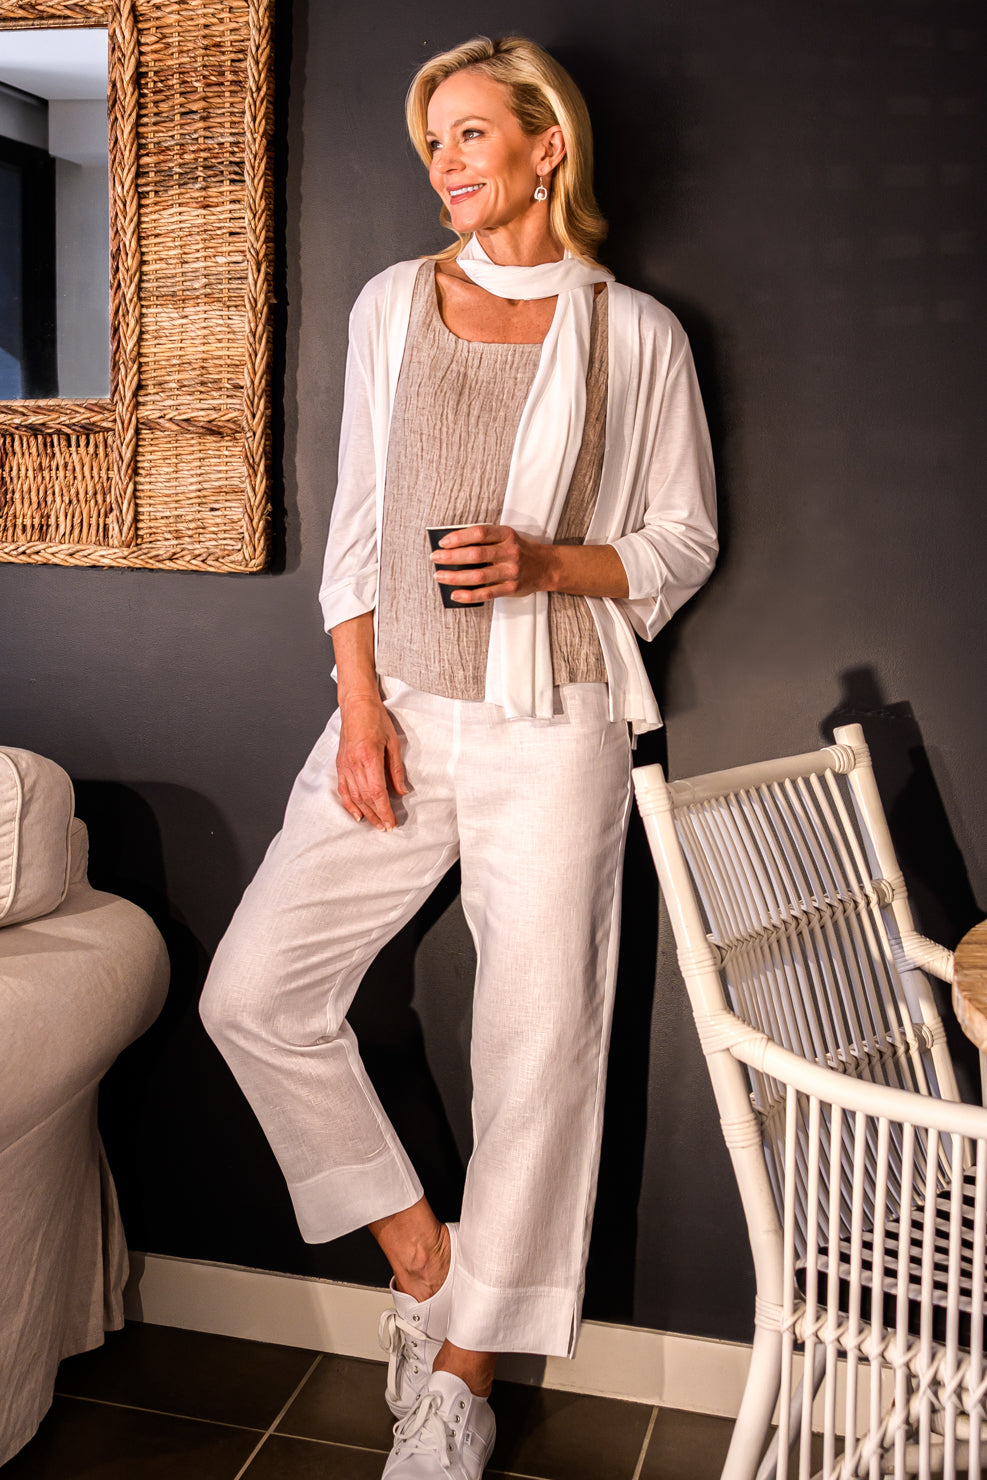 Women's Cotton & Linen Pants & Shorts | Australian Made. Women's Shorts and Pants in Cotton and Linen Australian made. The range of colours, fabrics and designs is unrivalled. Linens and cottons are easy to wear for summer and winter.